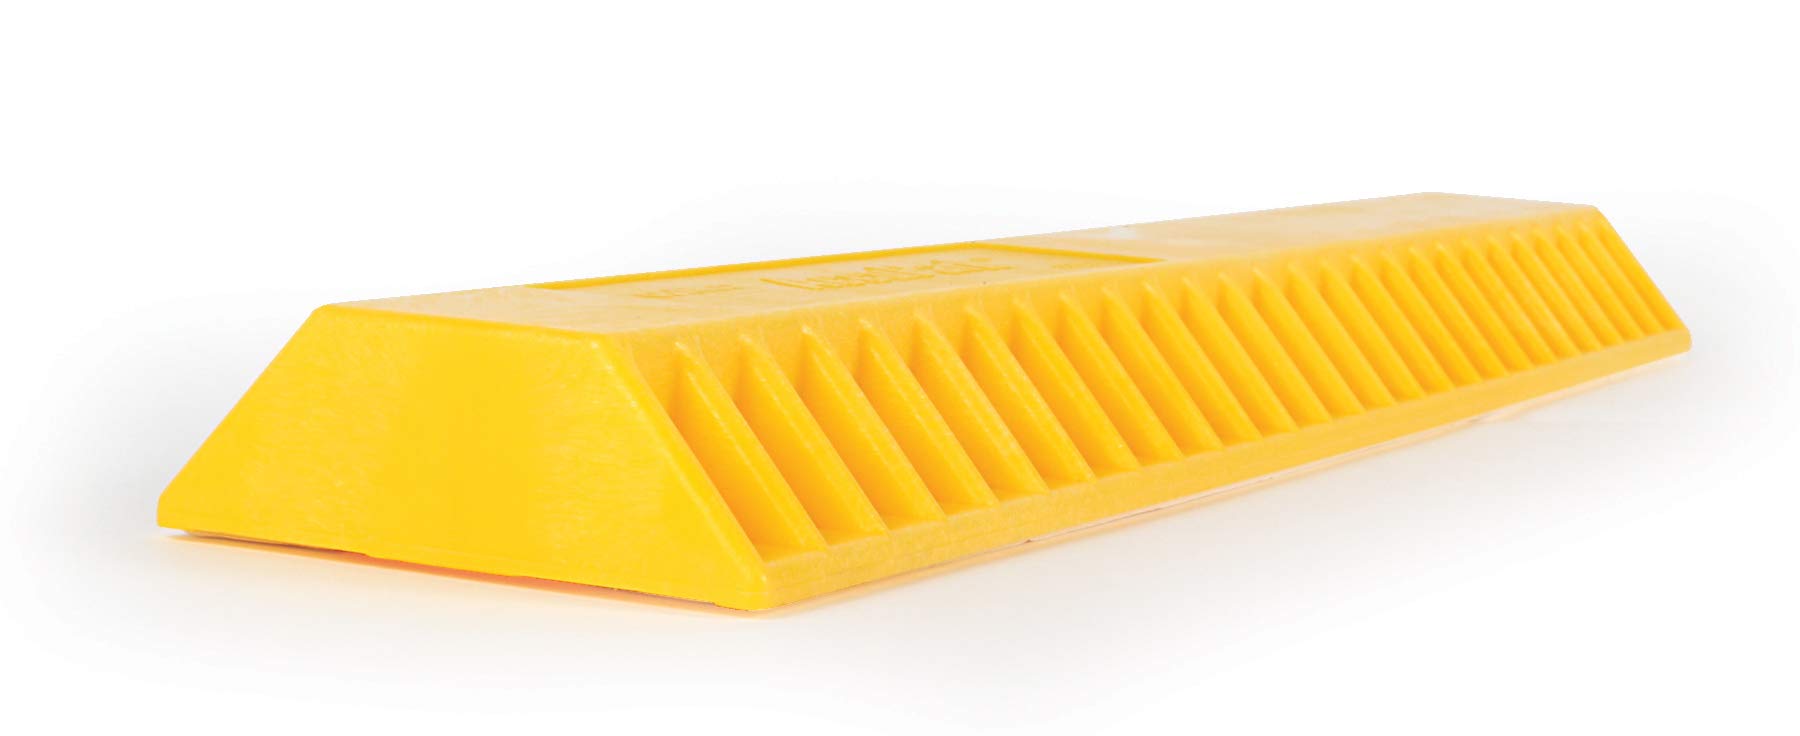 Camco AccuPark Vehicle Parking Aid | Provides A Parking Stopping Point For Your Garage | Yellow (44442)